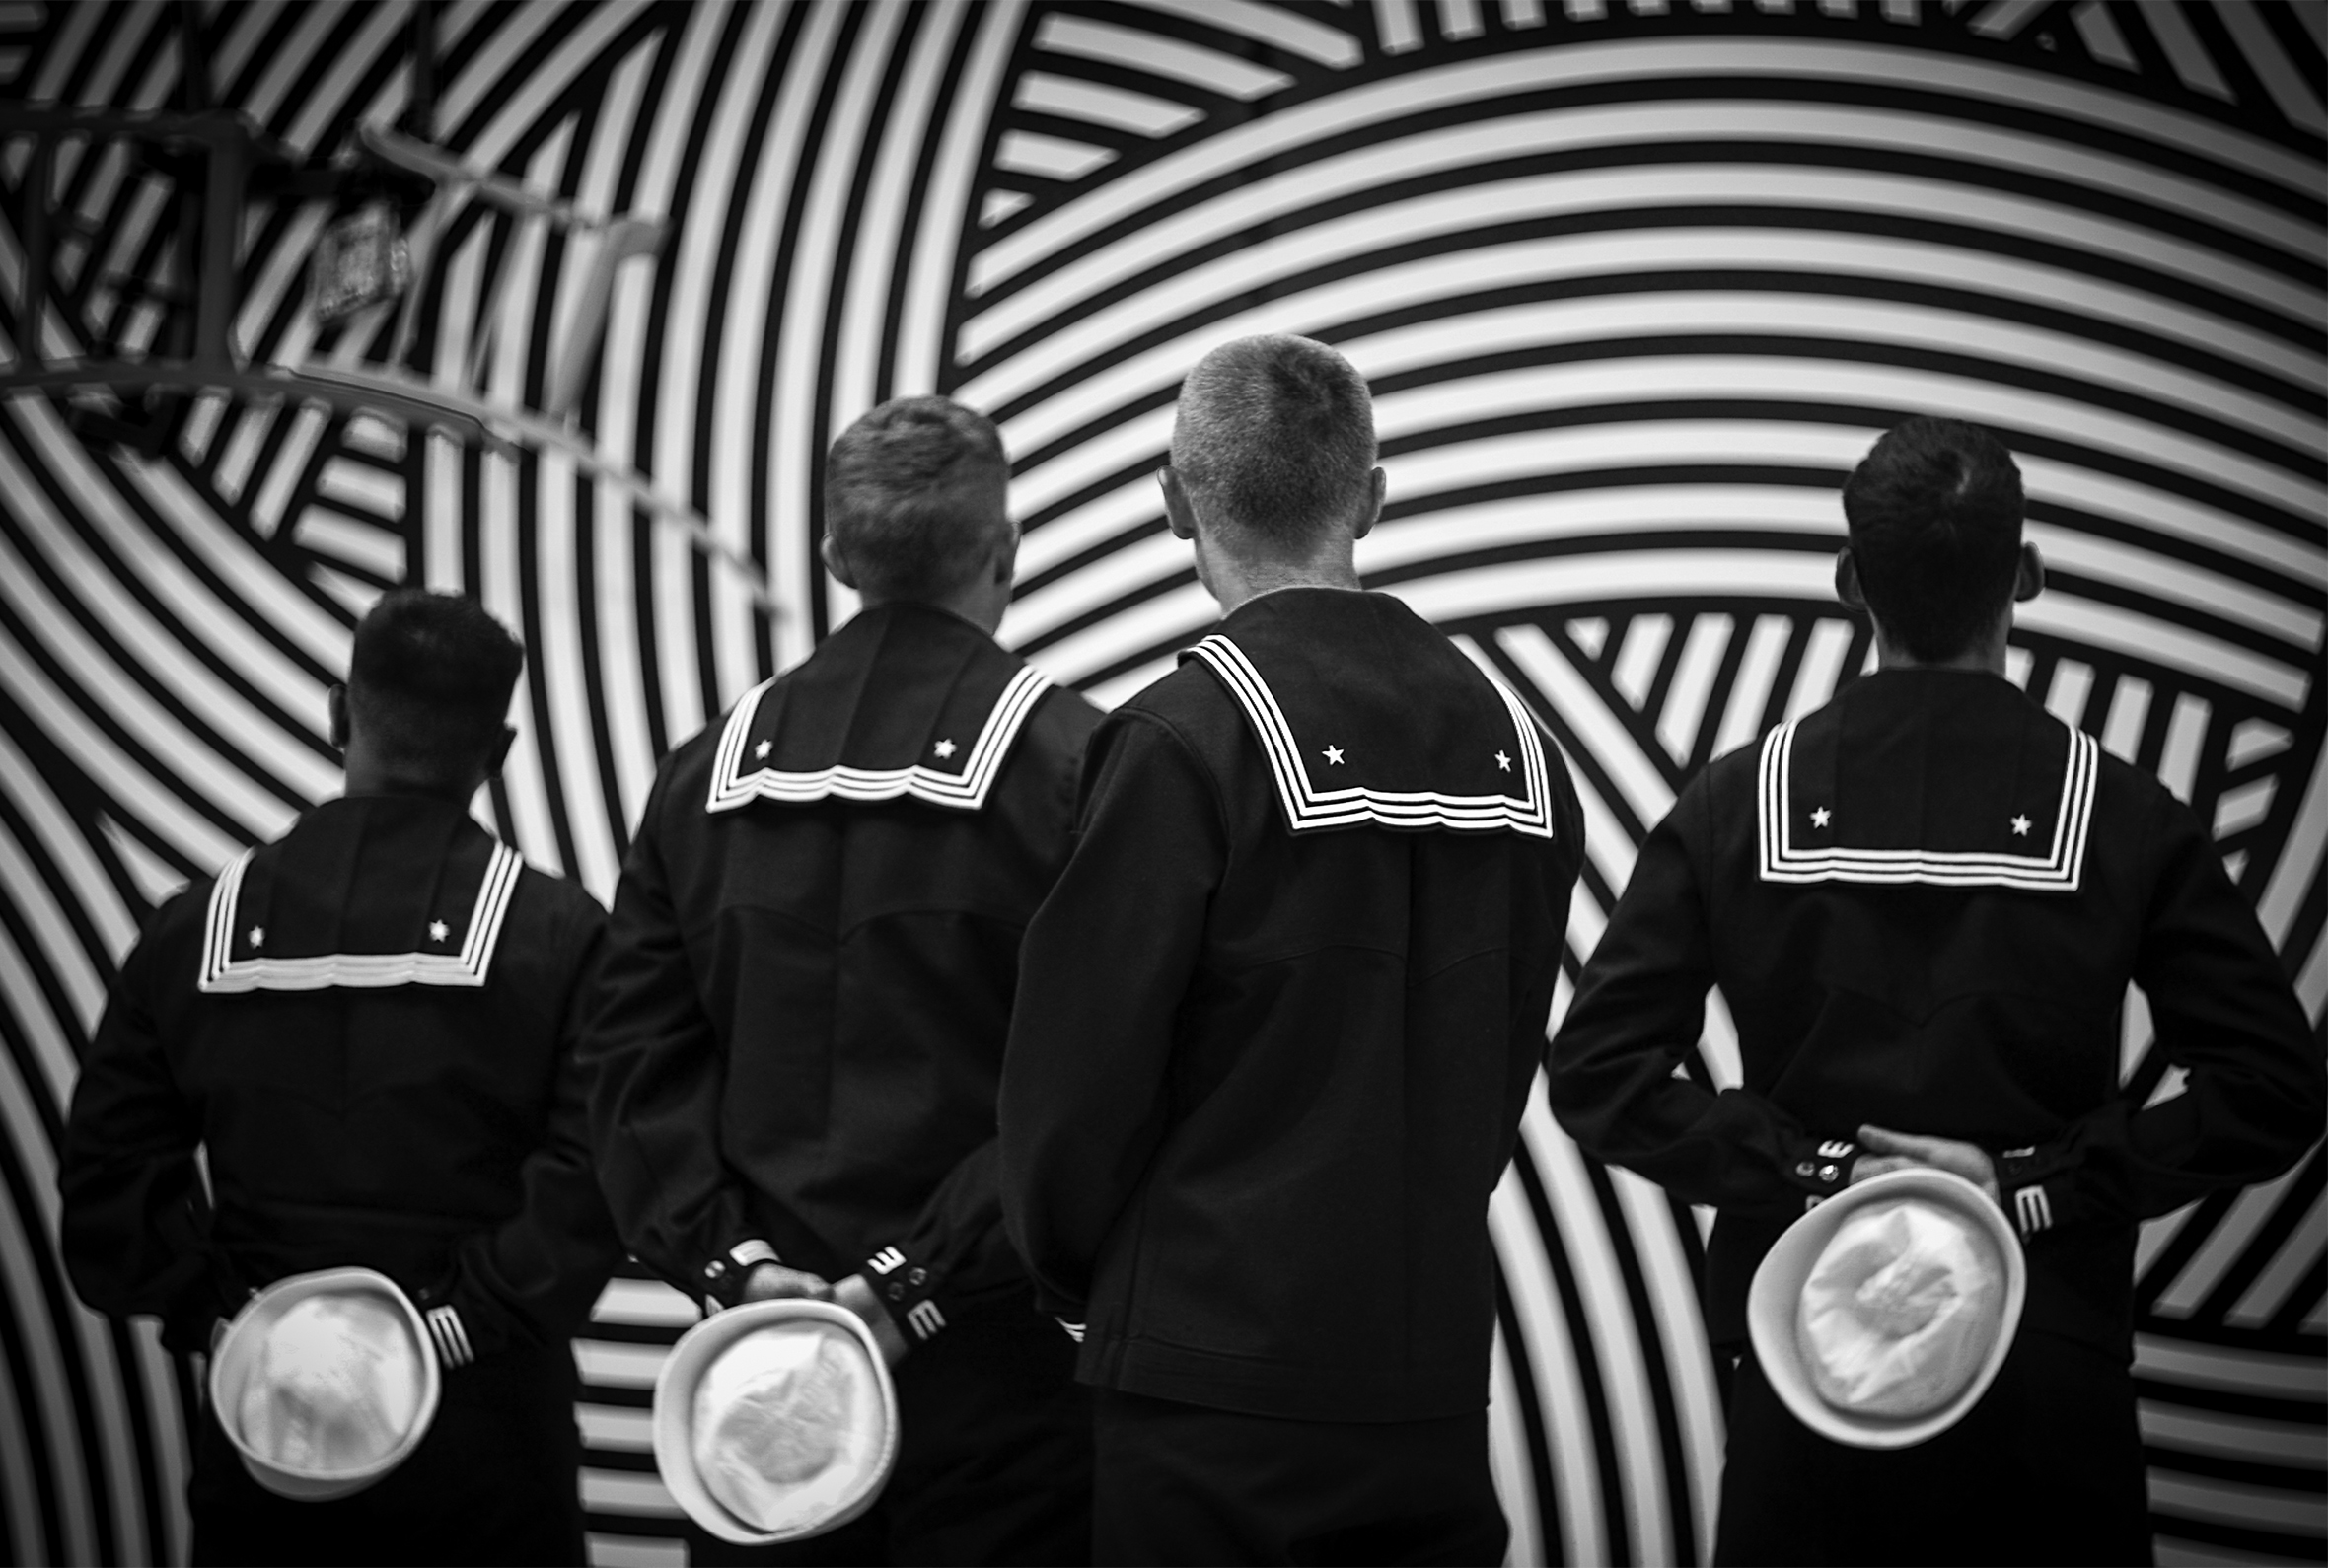 Four sailors in service dress blues seen from behind. Three have their hands behind their backs holding “Dixie cup” hats. They are in front of an art installation with curved, haphazard stripes and three interlocking chairs hanging from the top left.